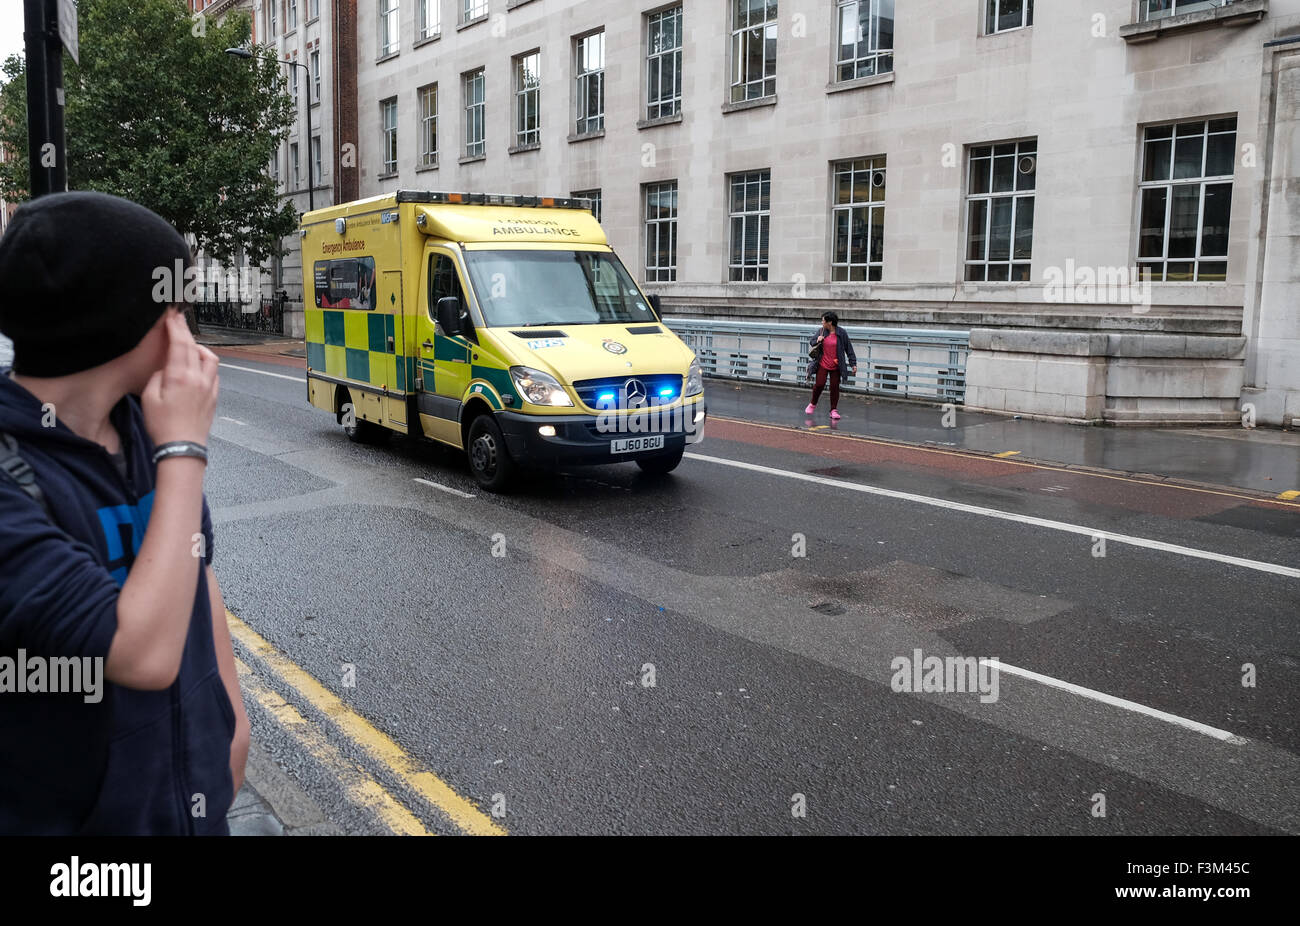 London ambulance services on an emergency call past London school of Hygiene and tropical medicine Stock Photo